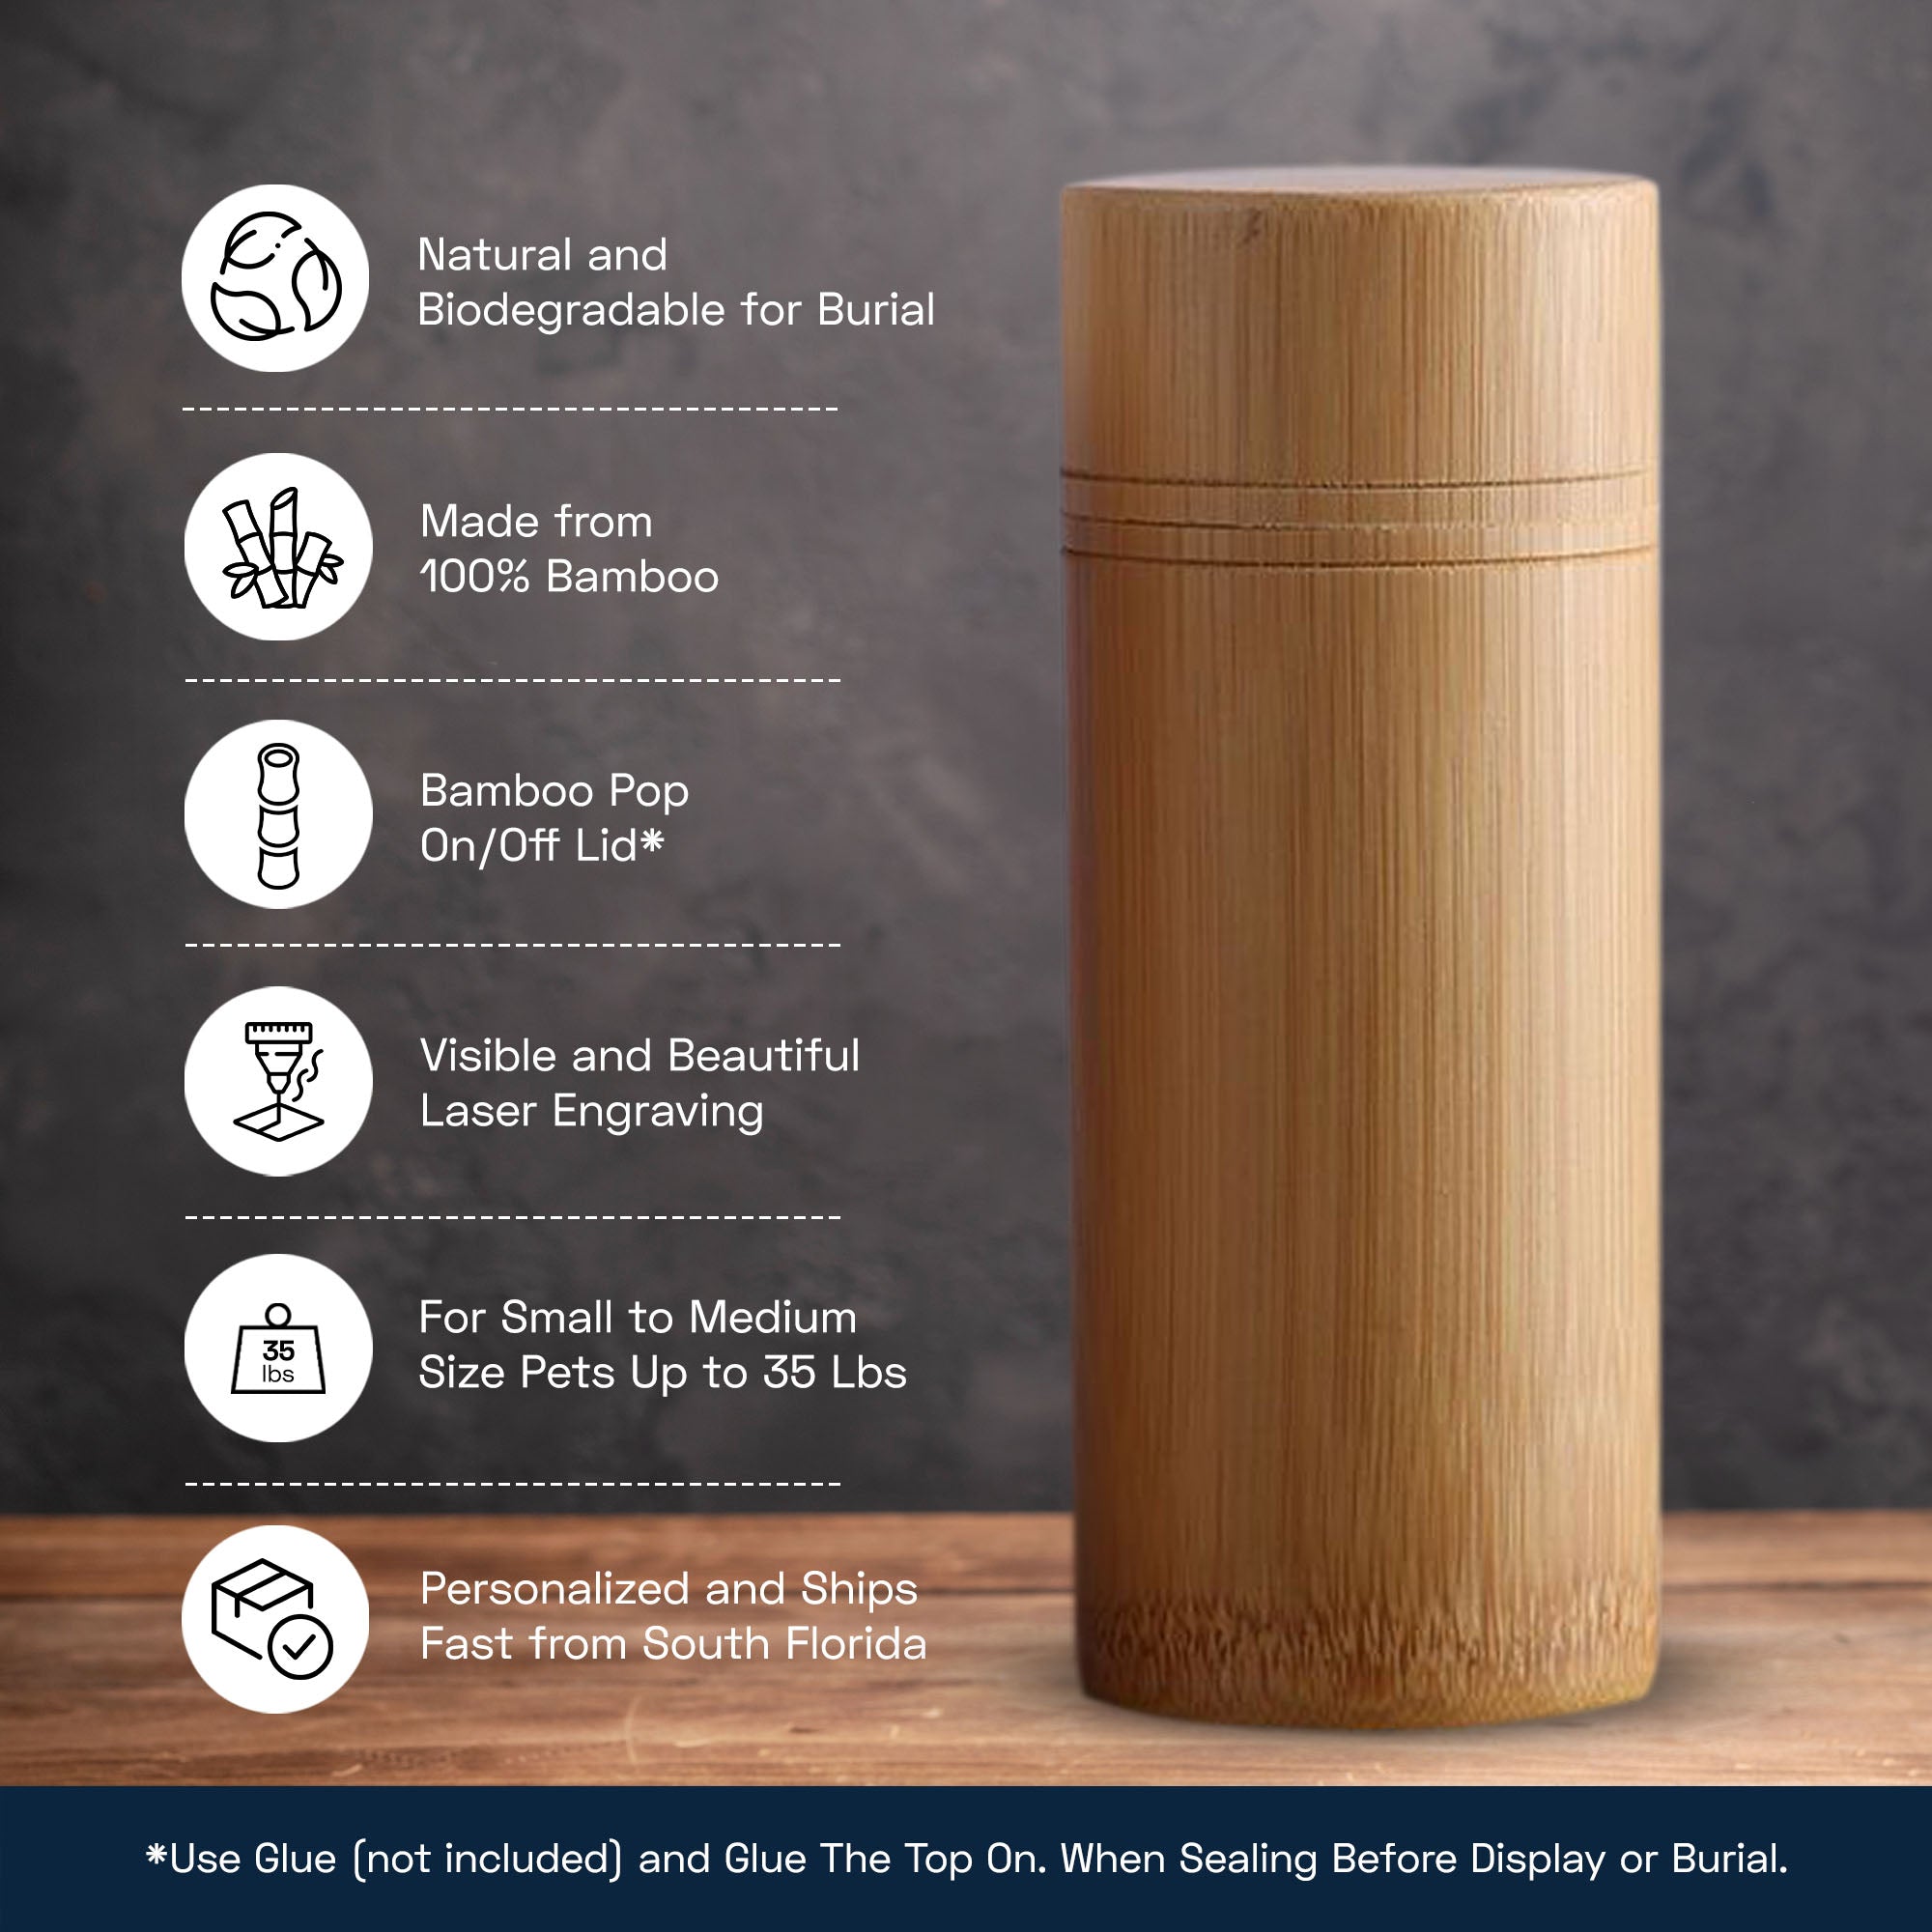 Personalized Custom Bamboo Tube Urn for Cat Pet Ashes: Environmentally Friendly Cremation Urn for Scattering, Burial, or Display Options - Pet Size up to 35 lbs